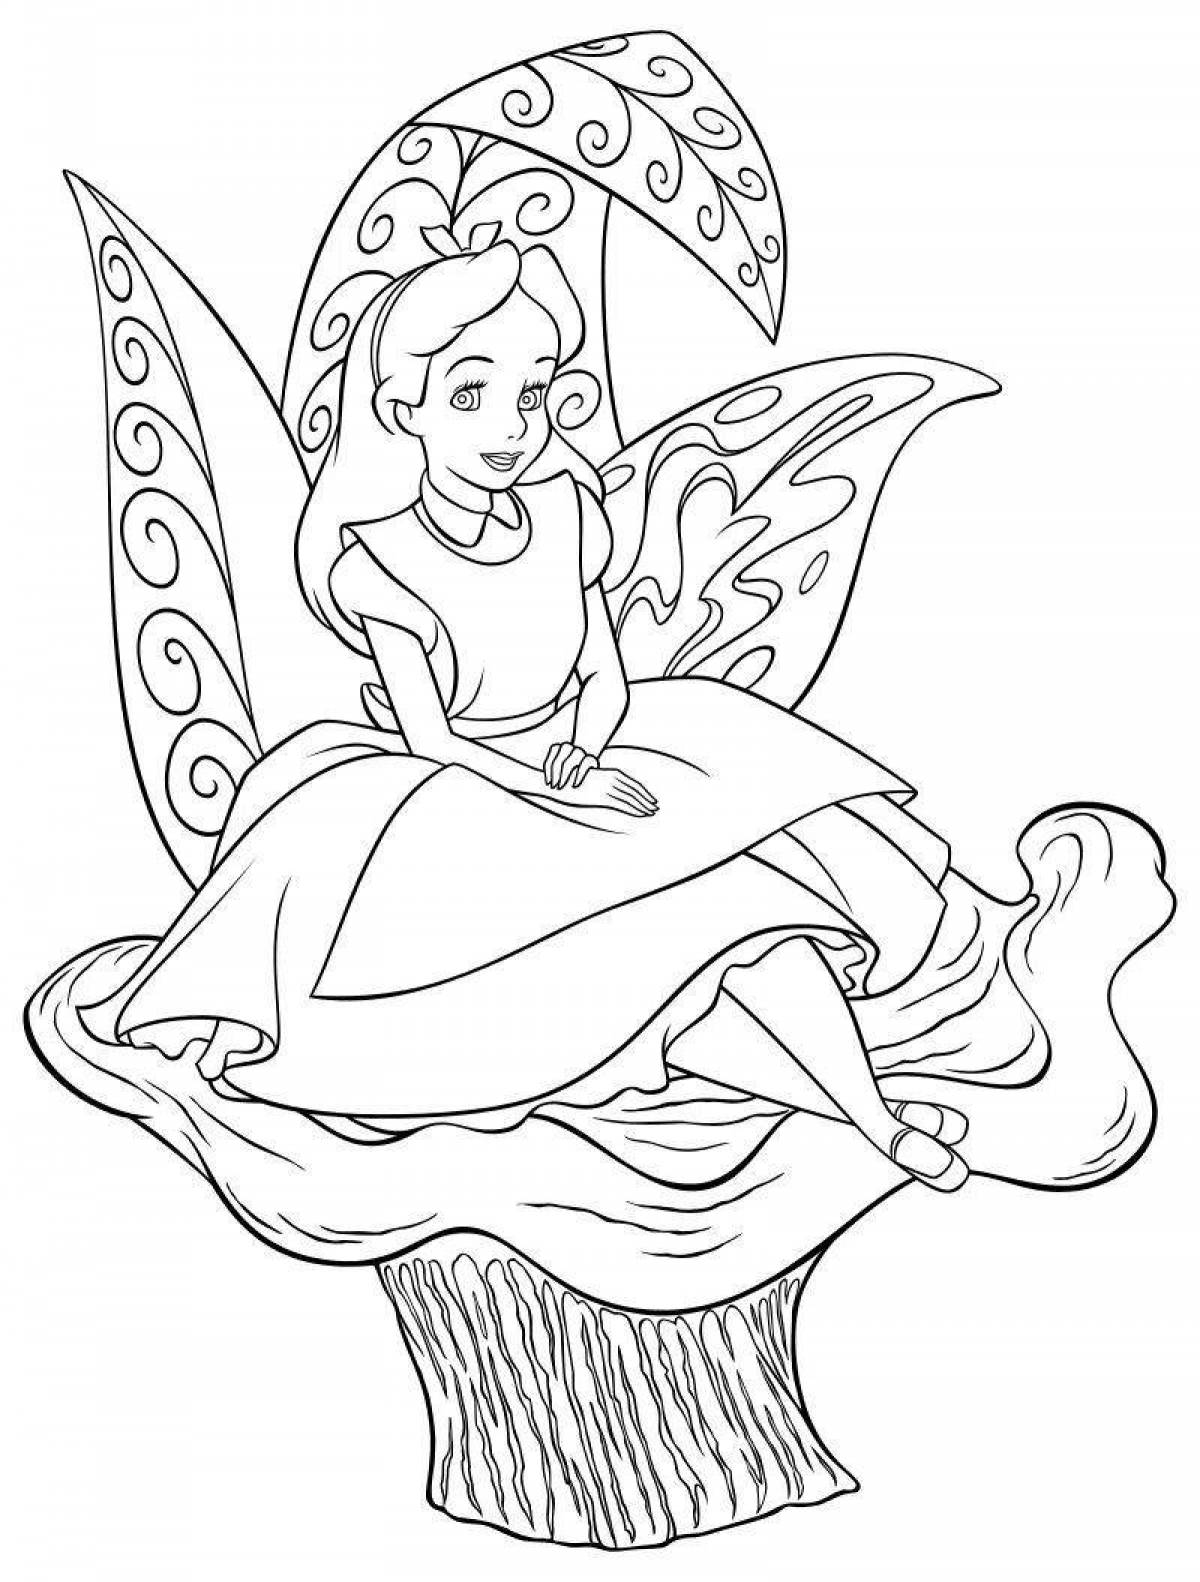 Colorful alice in wonderland disney coloring page